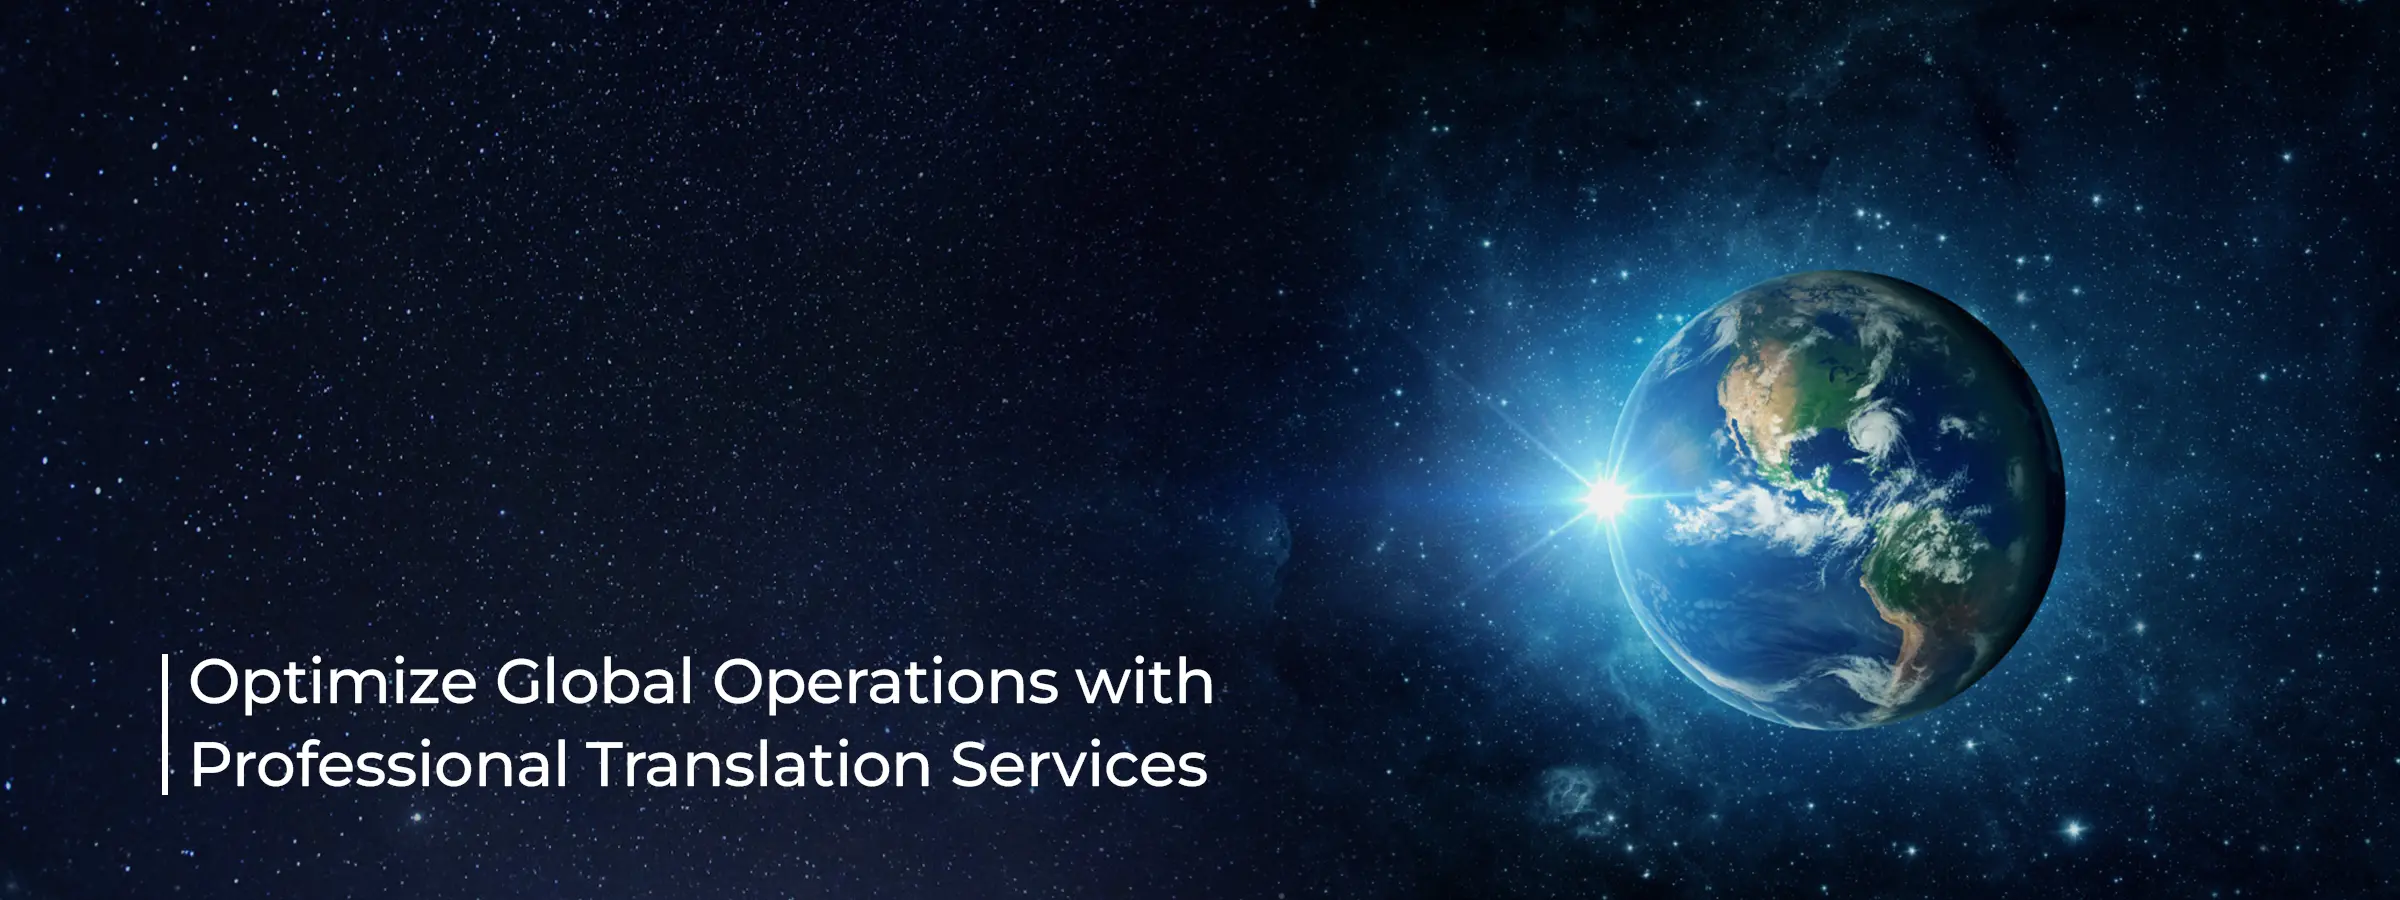 optimize-global-operations-with-professional-translation-services